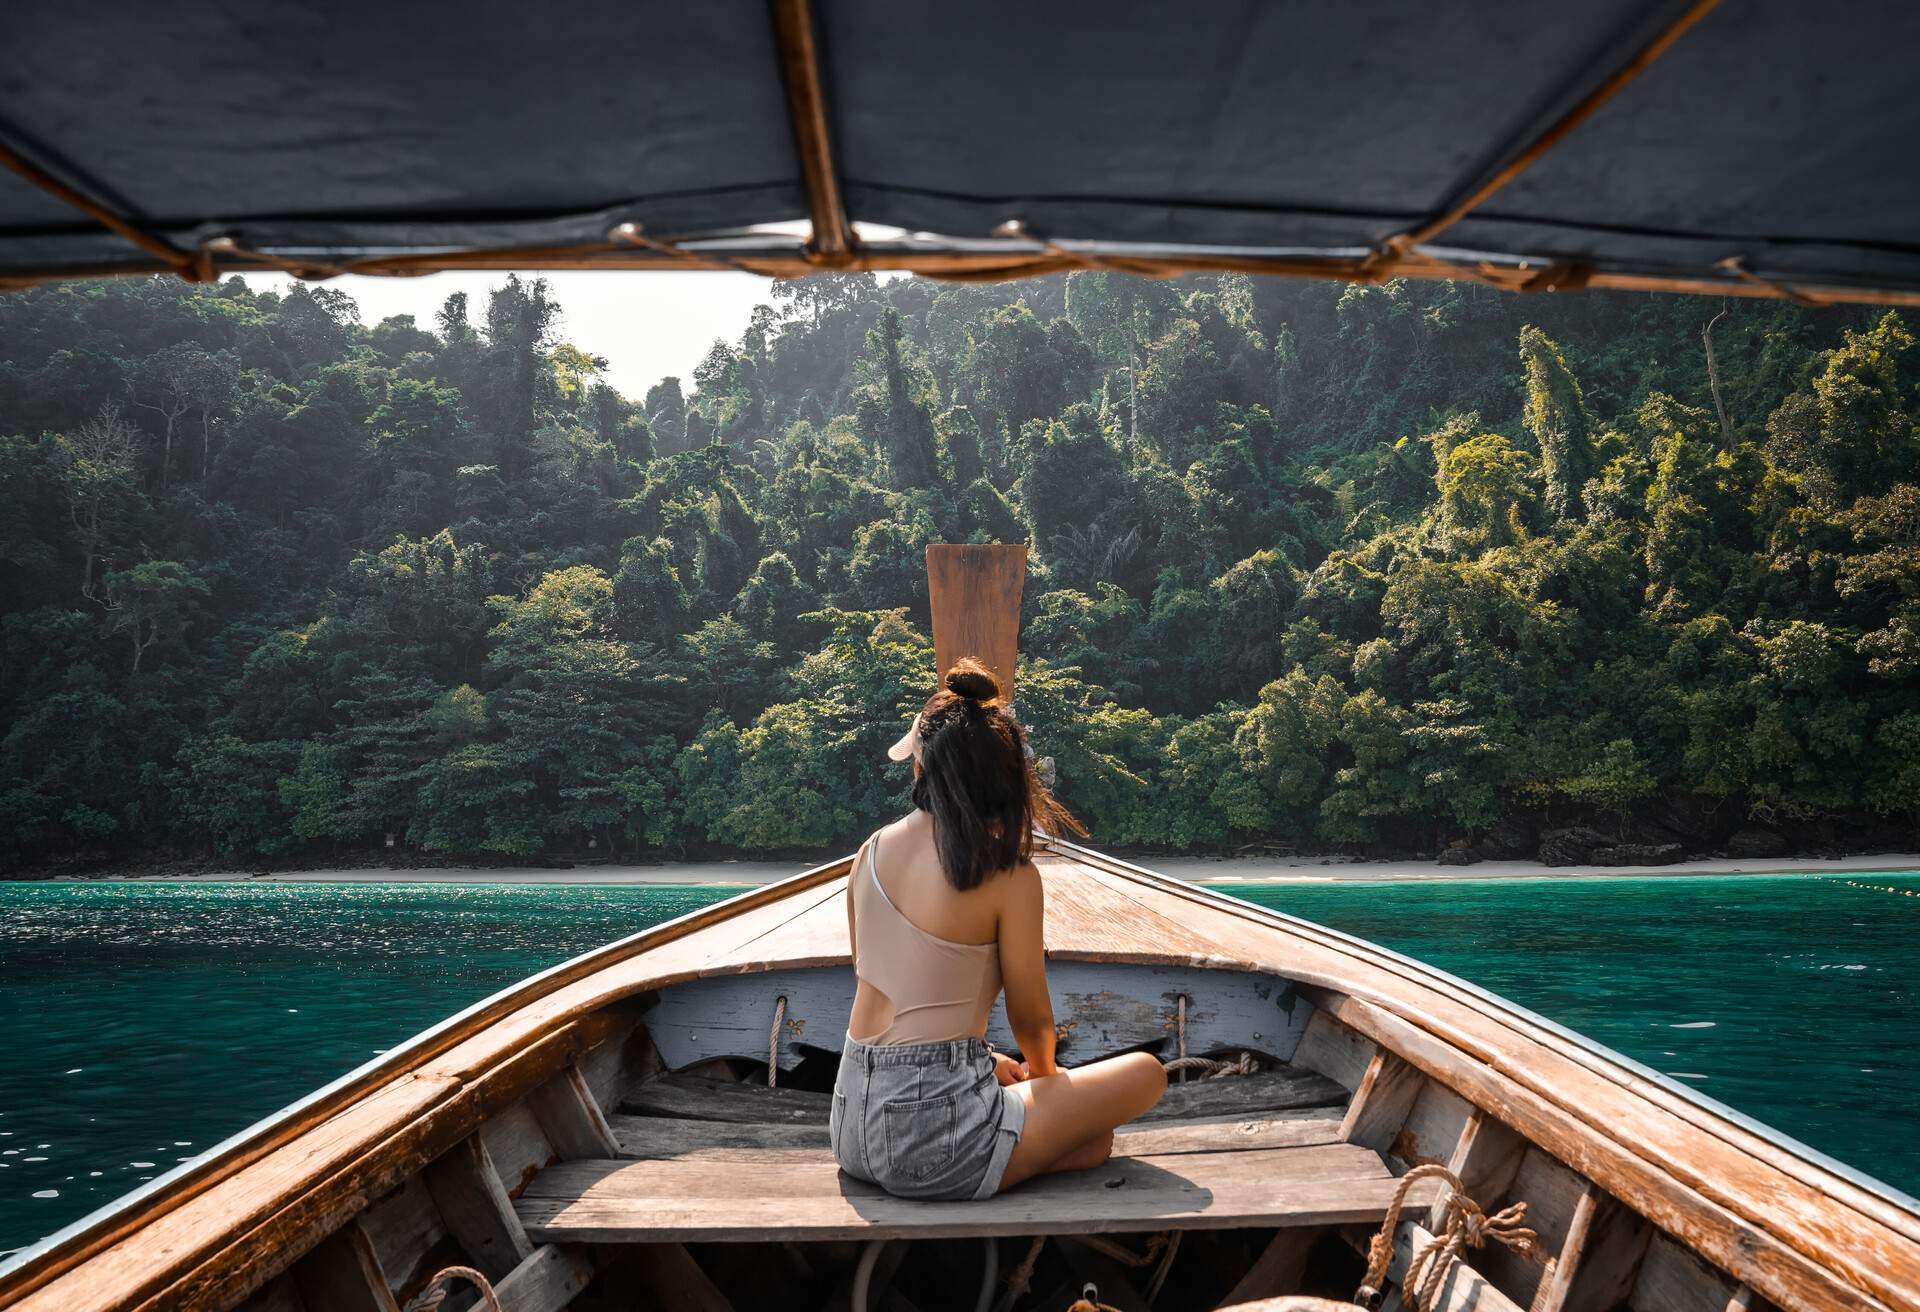 A young lady sits on the stern of the boat approaching the forested shore.